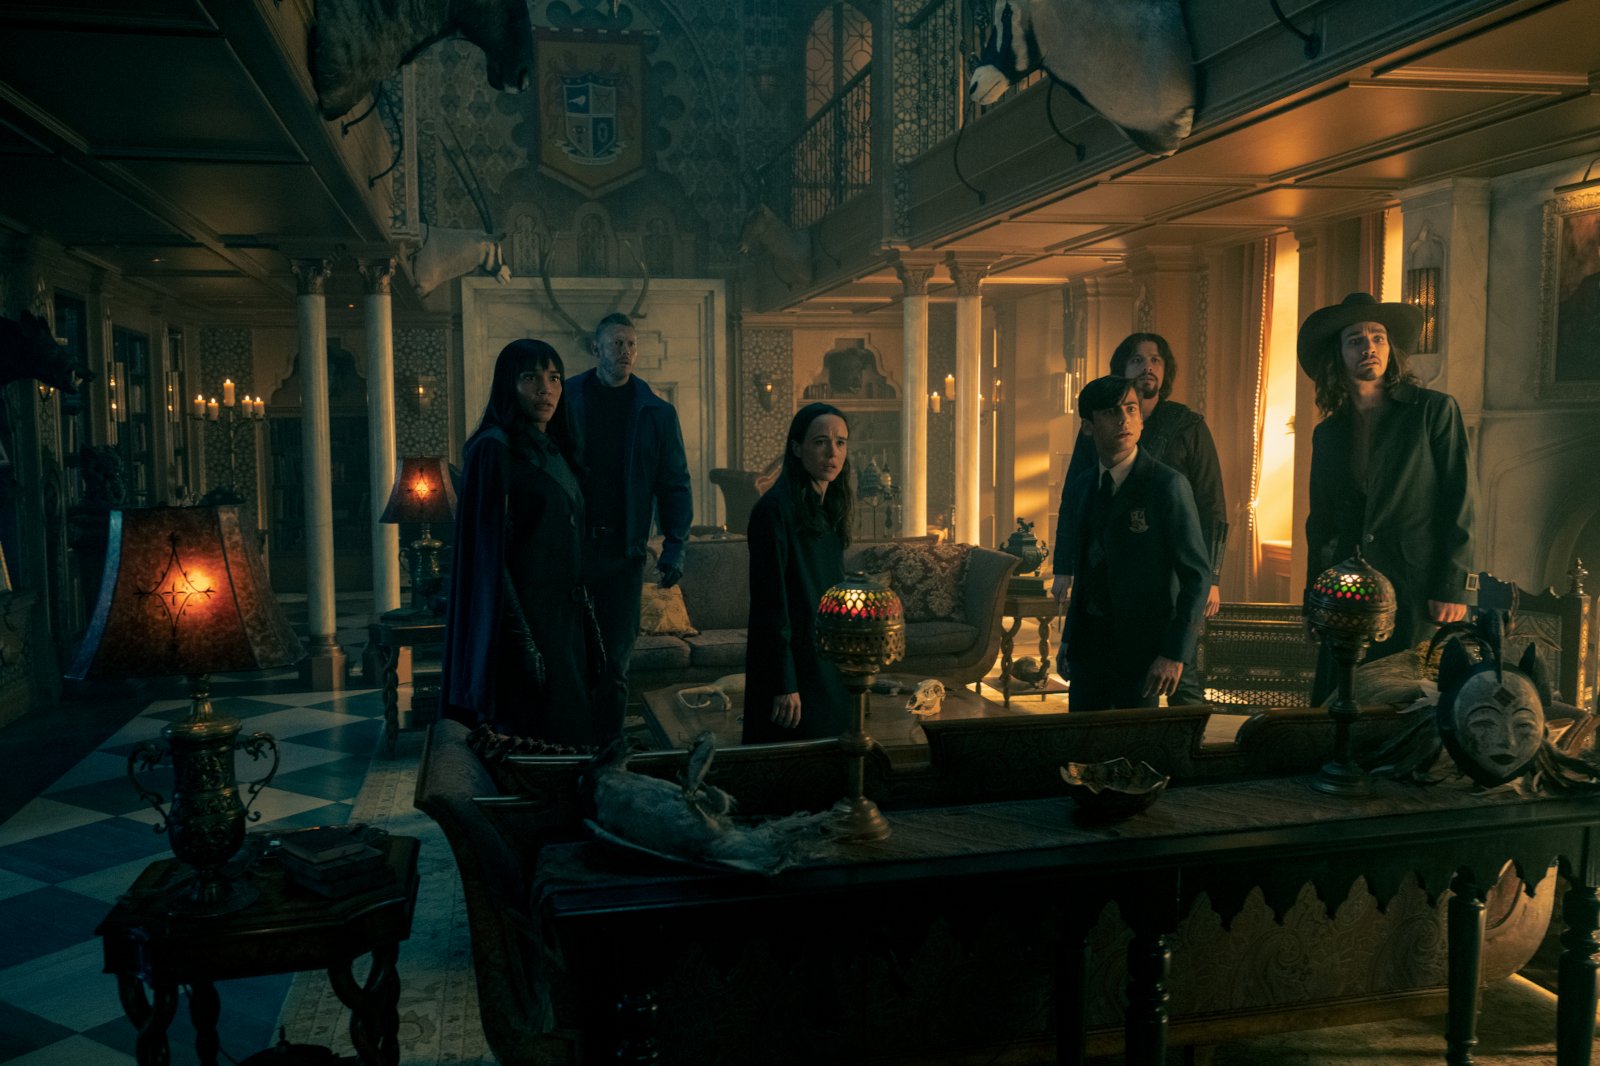 Emmy Raver-Lampman, Tom Hopper, Elliot Page, Aidan Gallagher, David Castañeda, and Robert Sheehan in 'The Umbrella Academy' Season 2 Episode 10. They're standing in the Hargreeves family's living room and looking up at something.